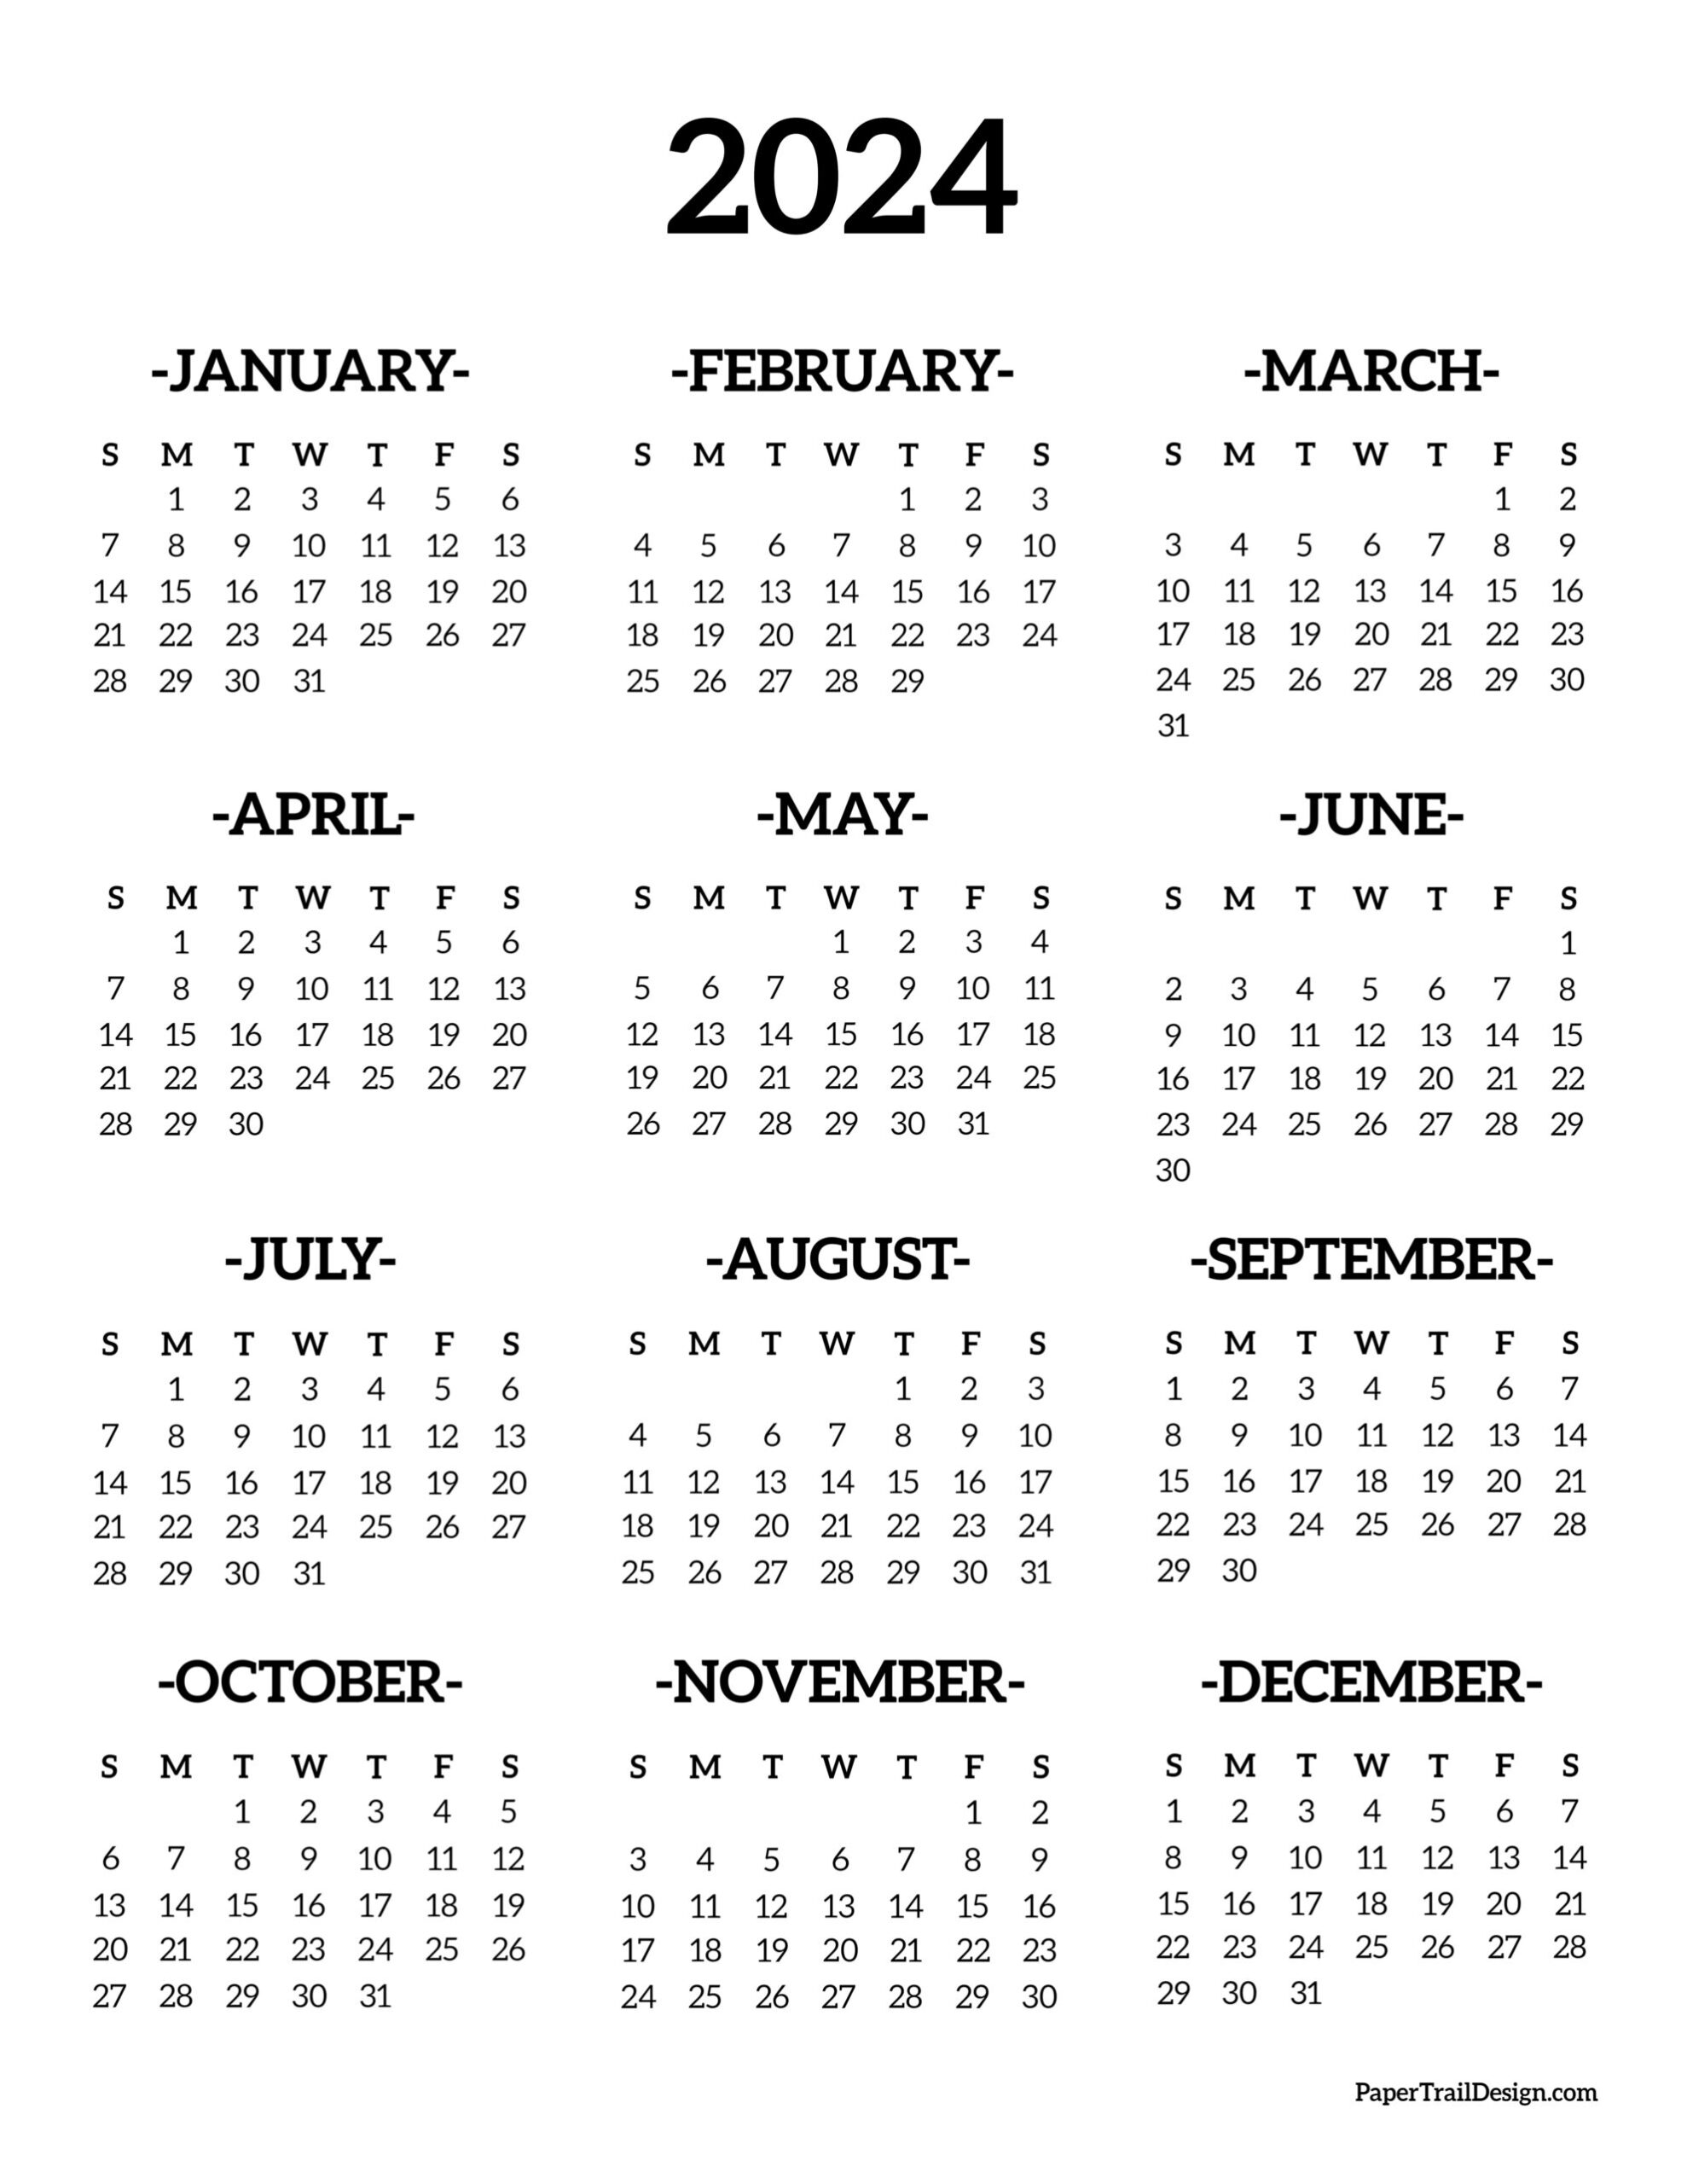 Calendar 2024 Printable One Page - Paper Trail Design for 2024 Whole Year Calendar Printable